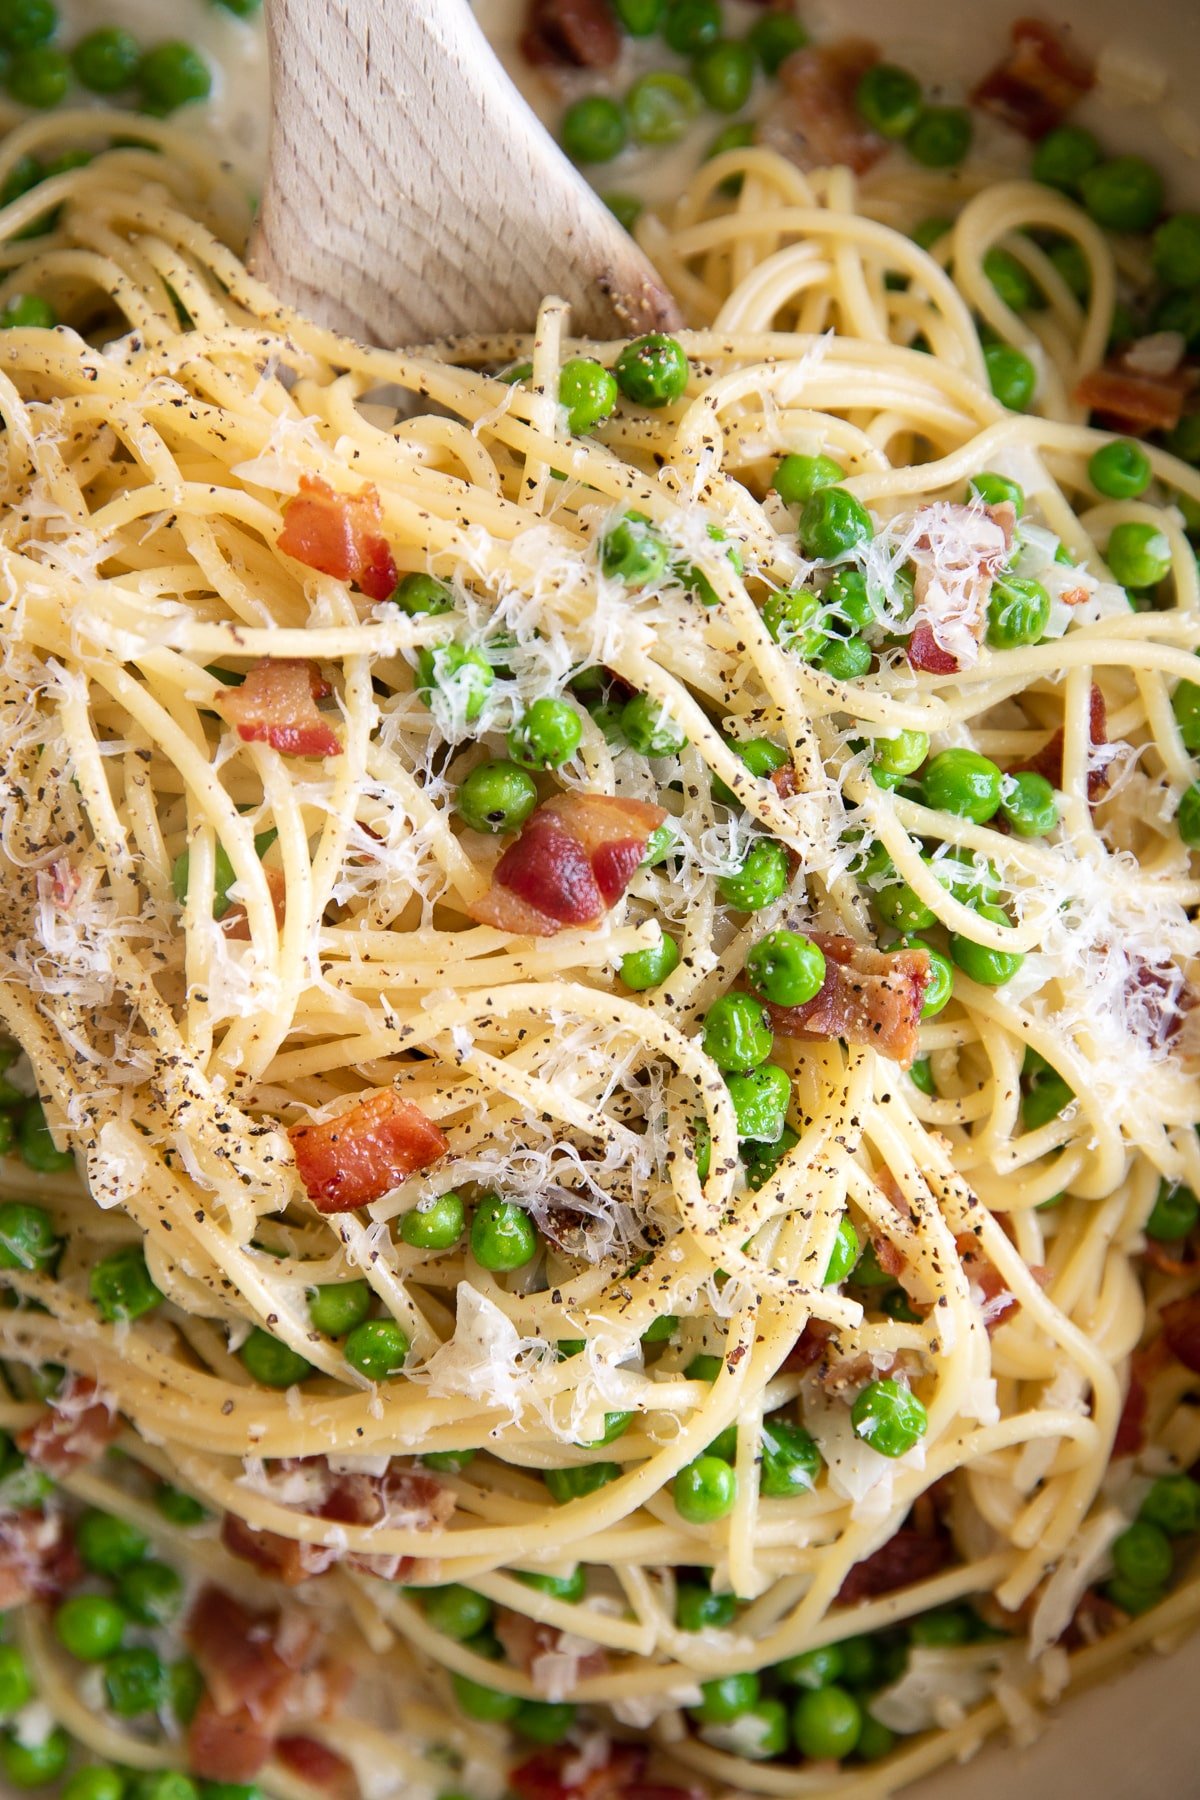 Close up image of spaghetti noodle pasta with bacon and peas in a cream sauce and garnished with fresh parmesan cheese and black pepper.